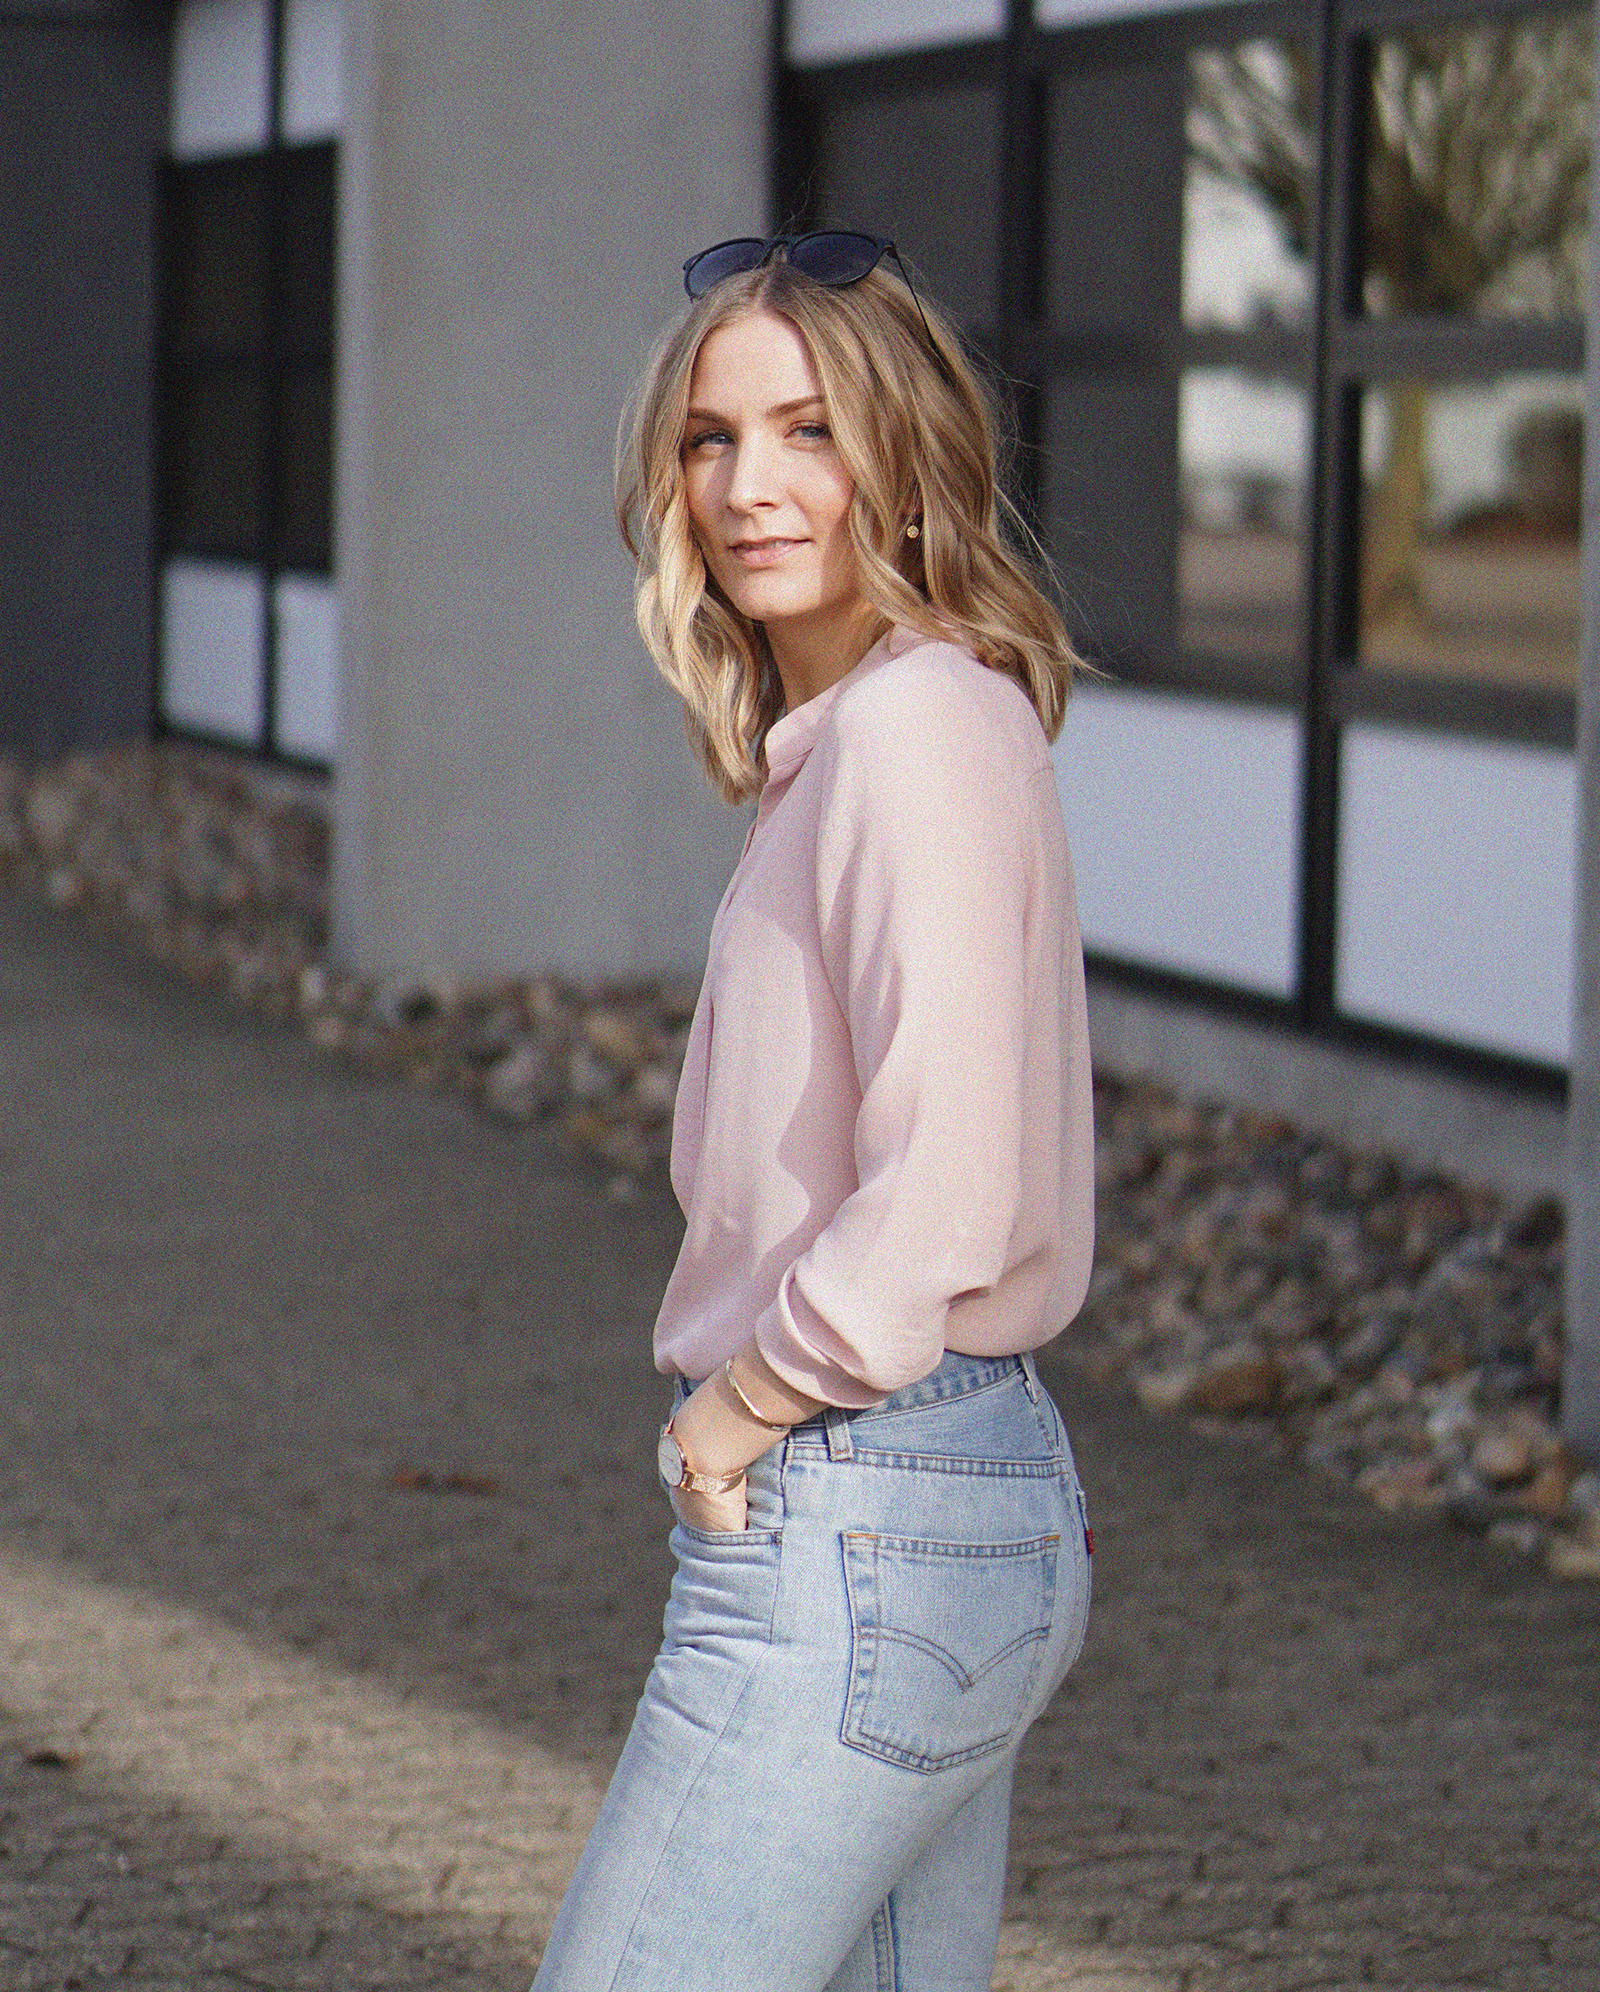 Style: blush shirt and blue jeans.